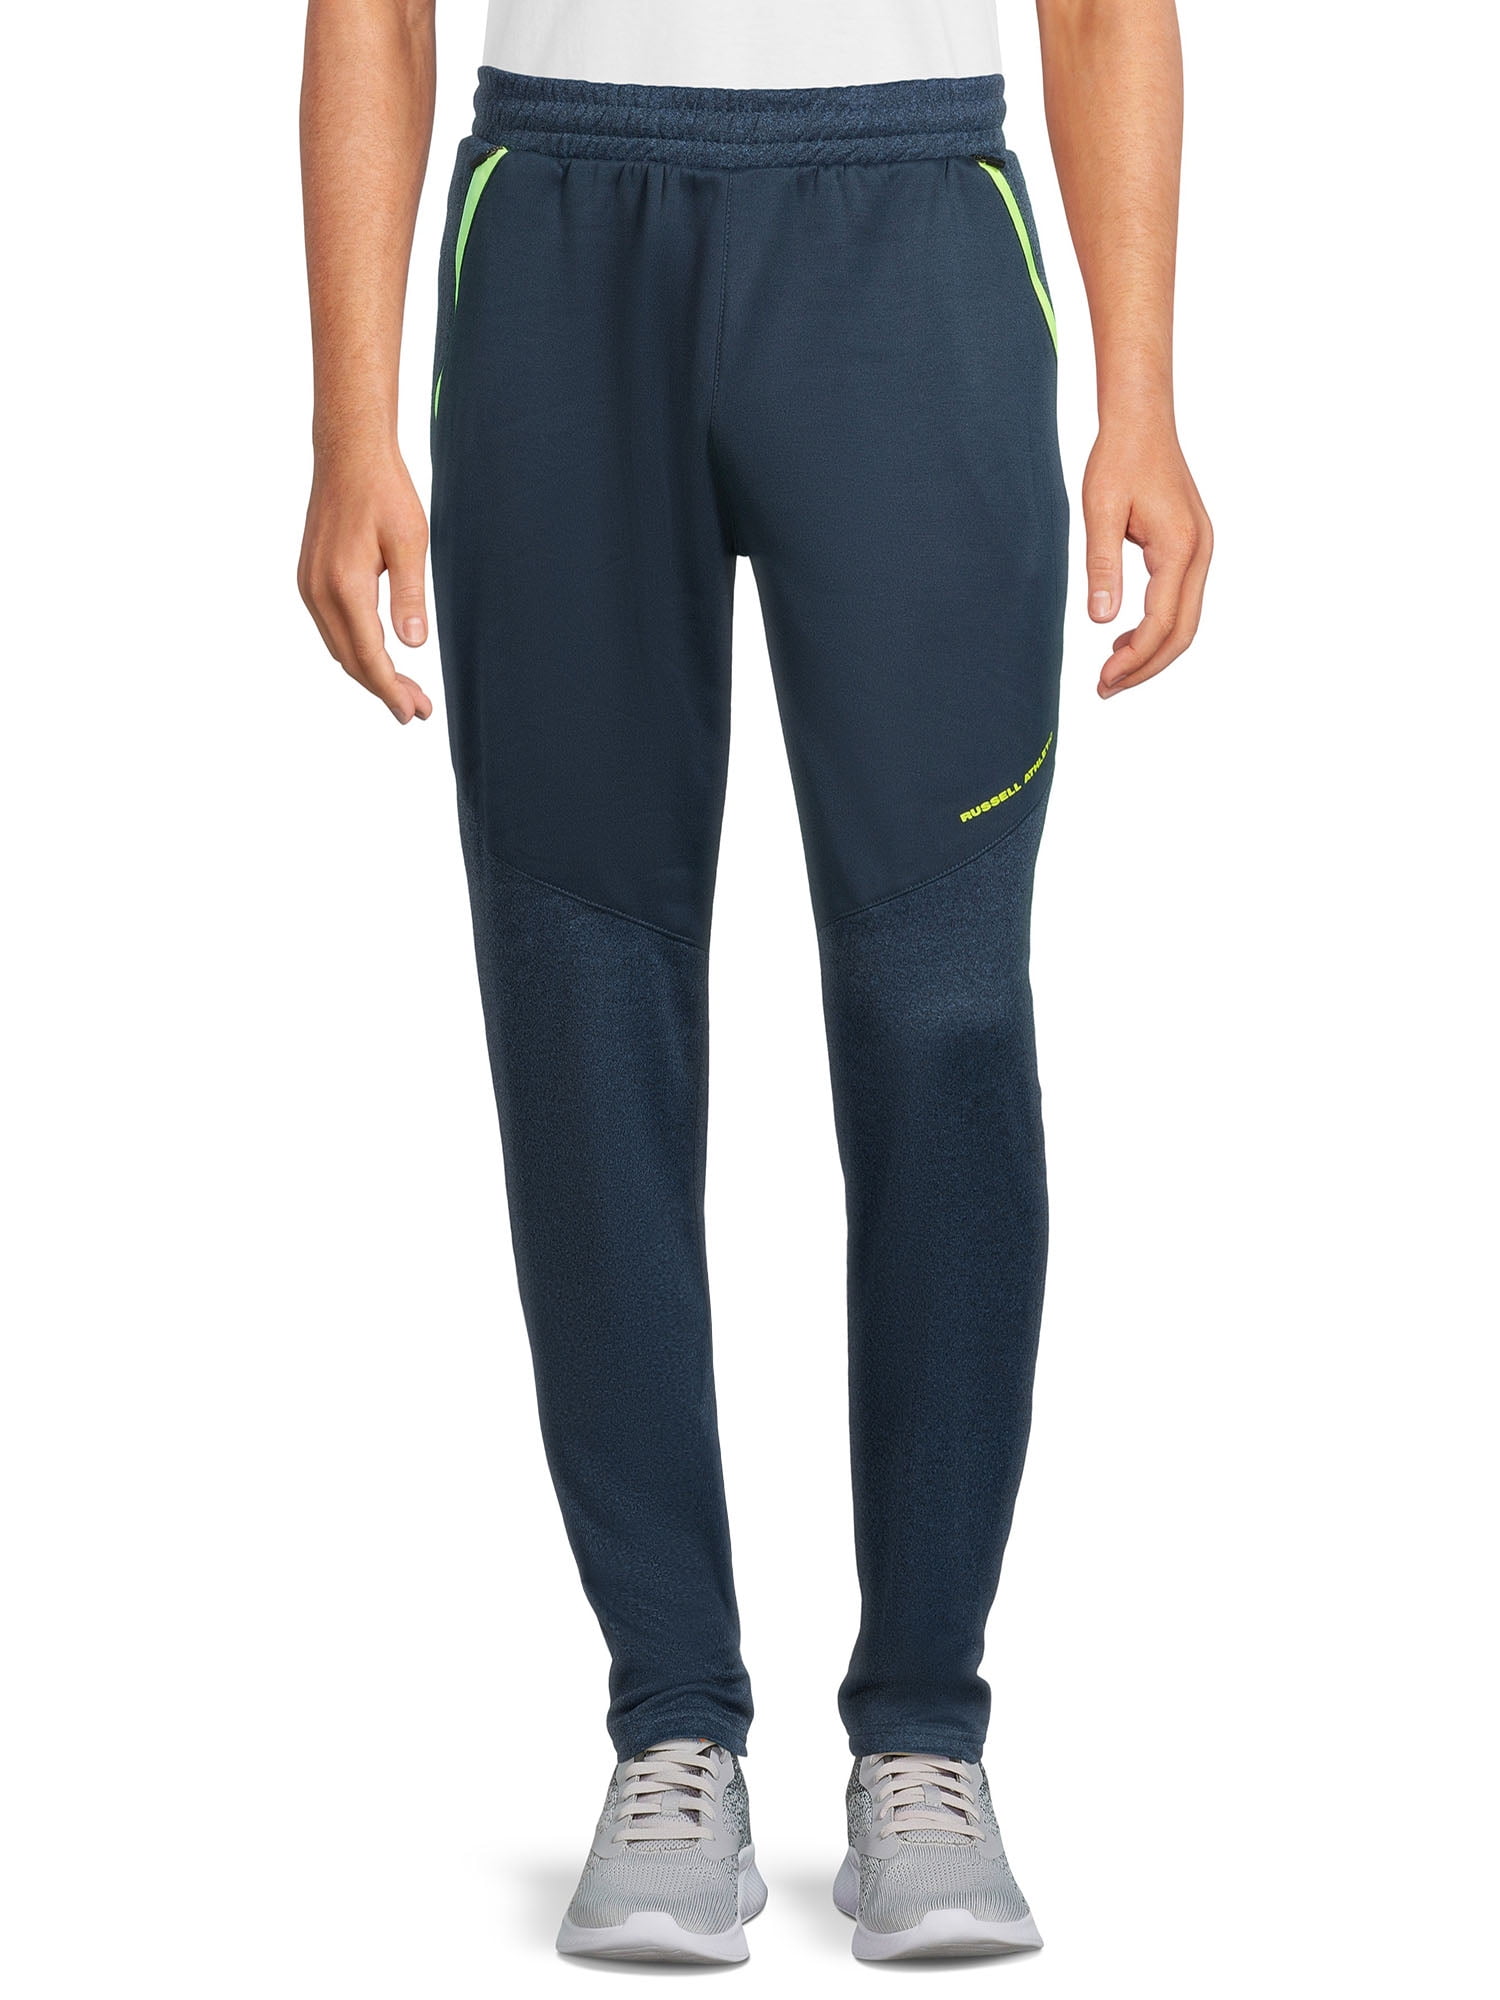 Buy Teal Blue Track Pants for Men by PERFORMAX Online | Ajio.com